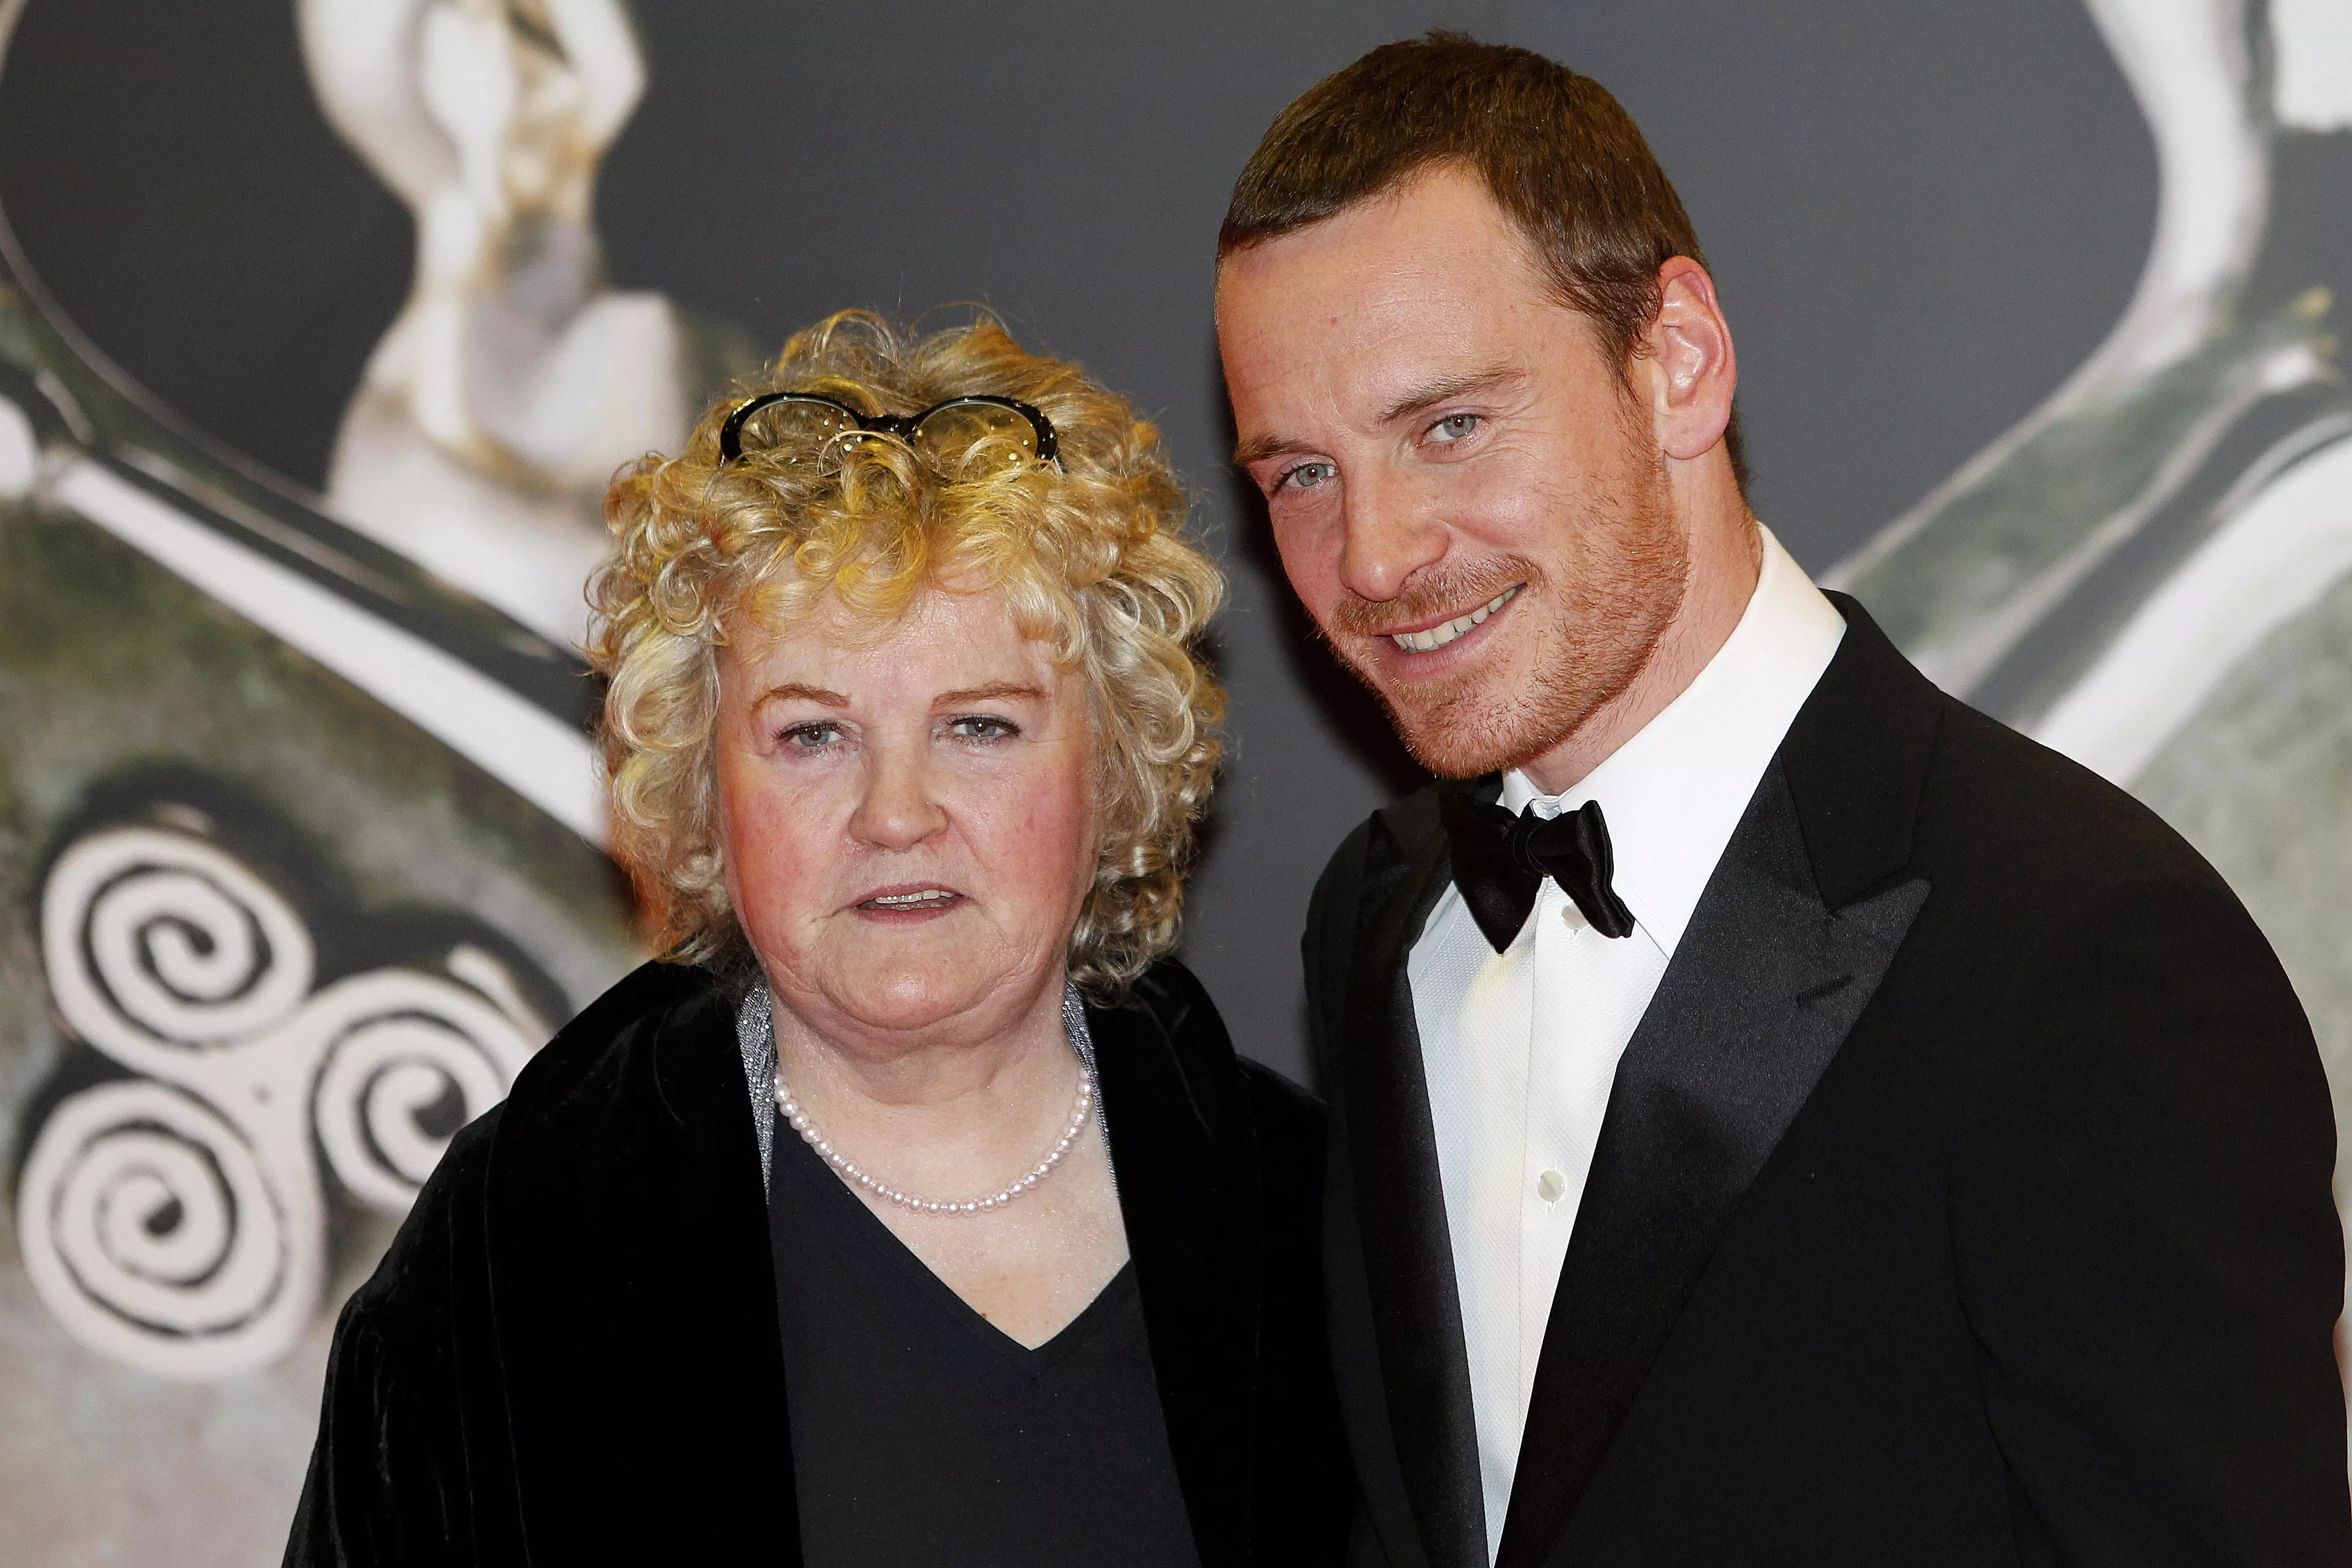 Brenda Fricker with Michael Fassbender at the Irish Television Awards in 2012.